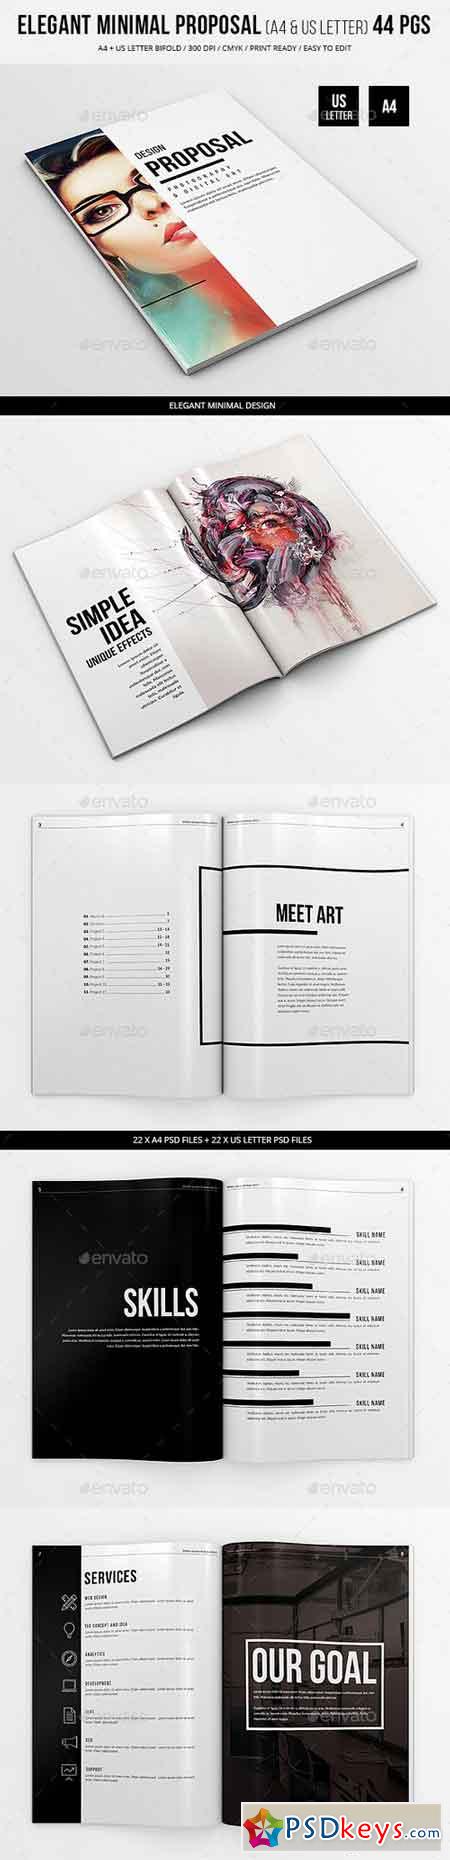 Elegant Minimal Proposal - 44 pgs - A4 and US Letter 20076300